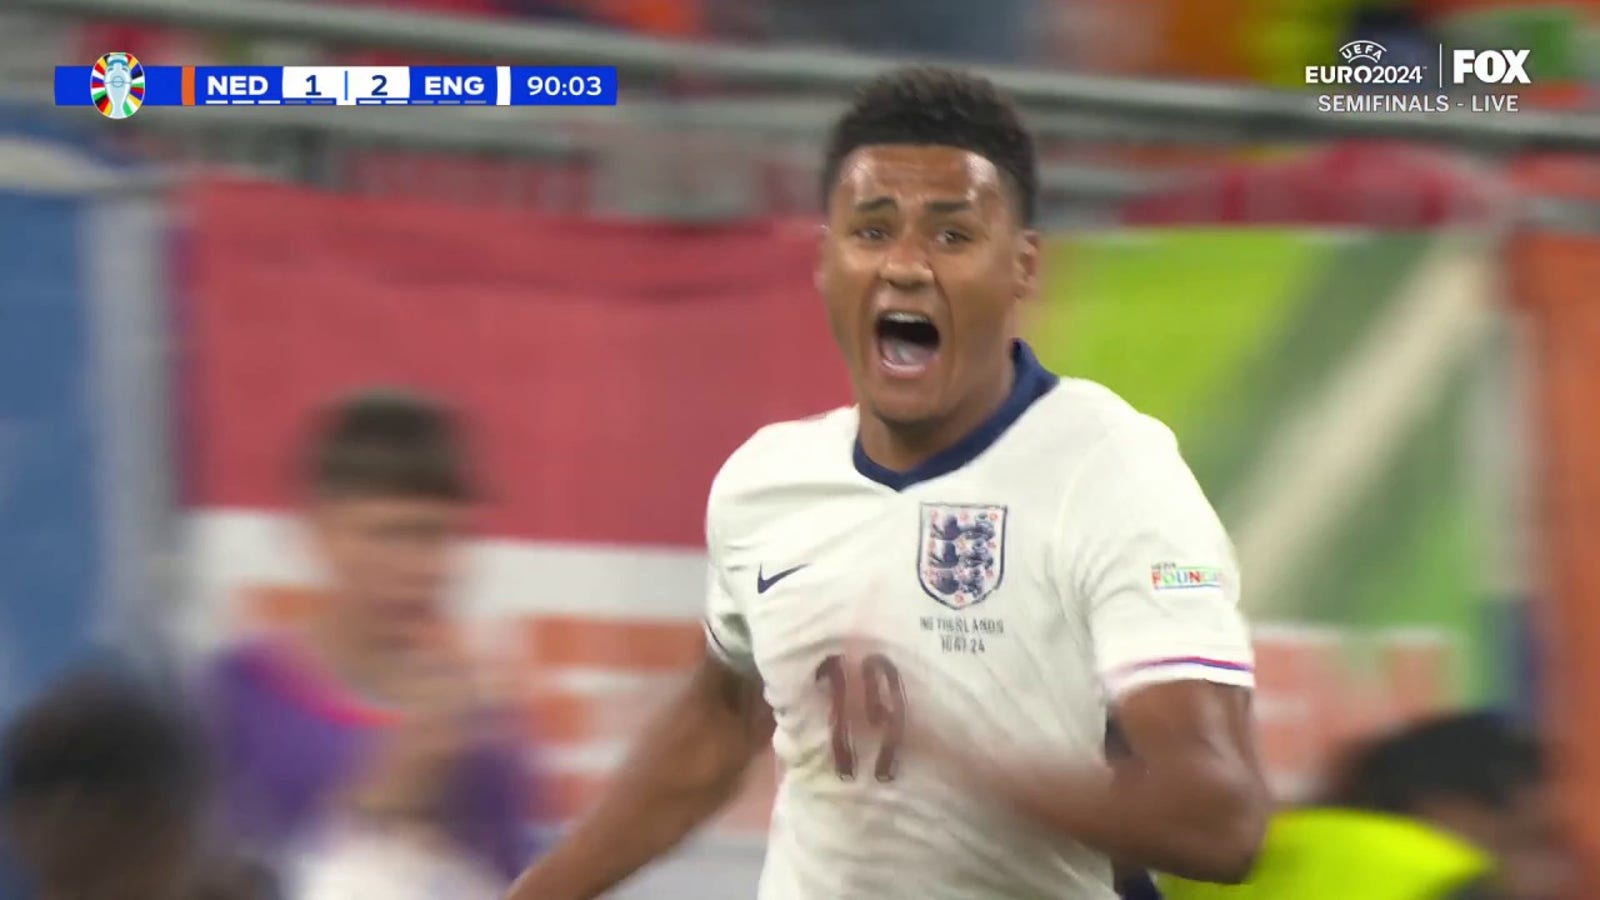 Ollie Watkins scores in 90' to give England a 2-1 lead over the Netherlands